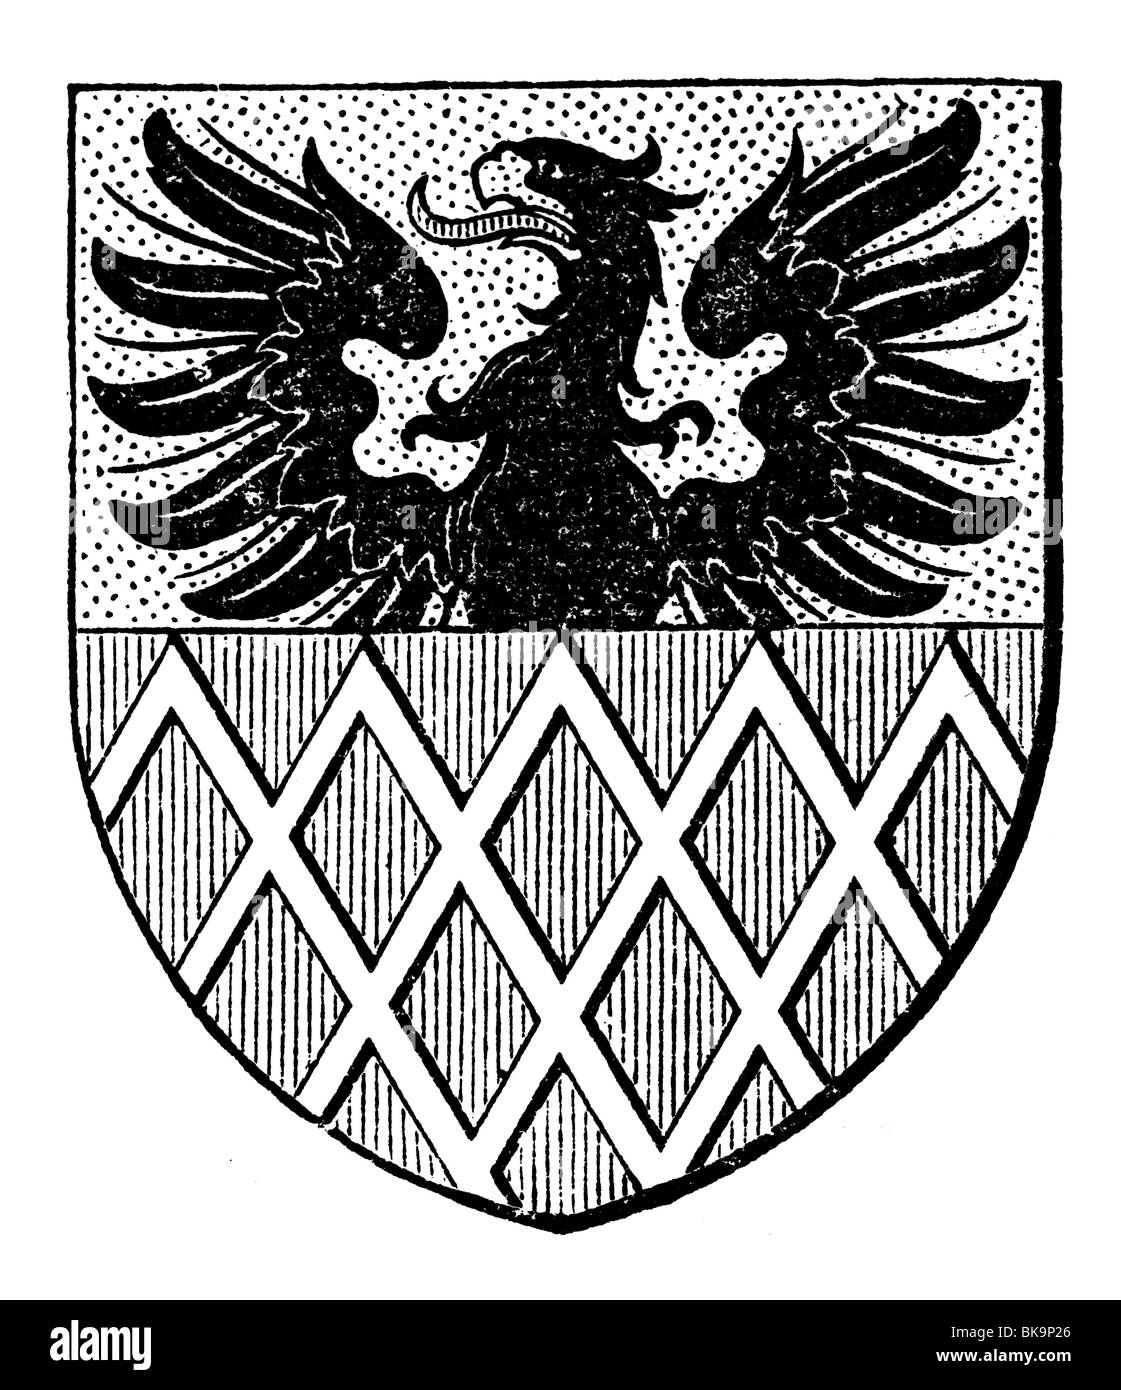 Coats of arms Eger Stock Photo